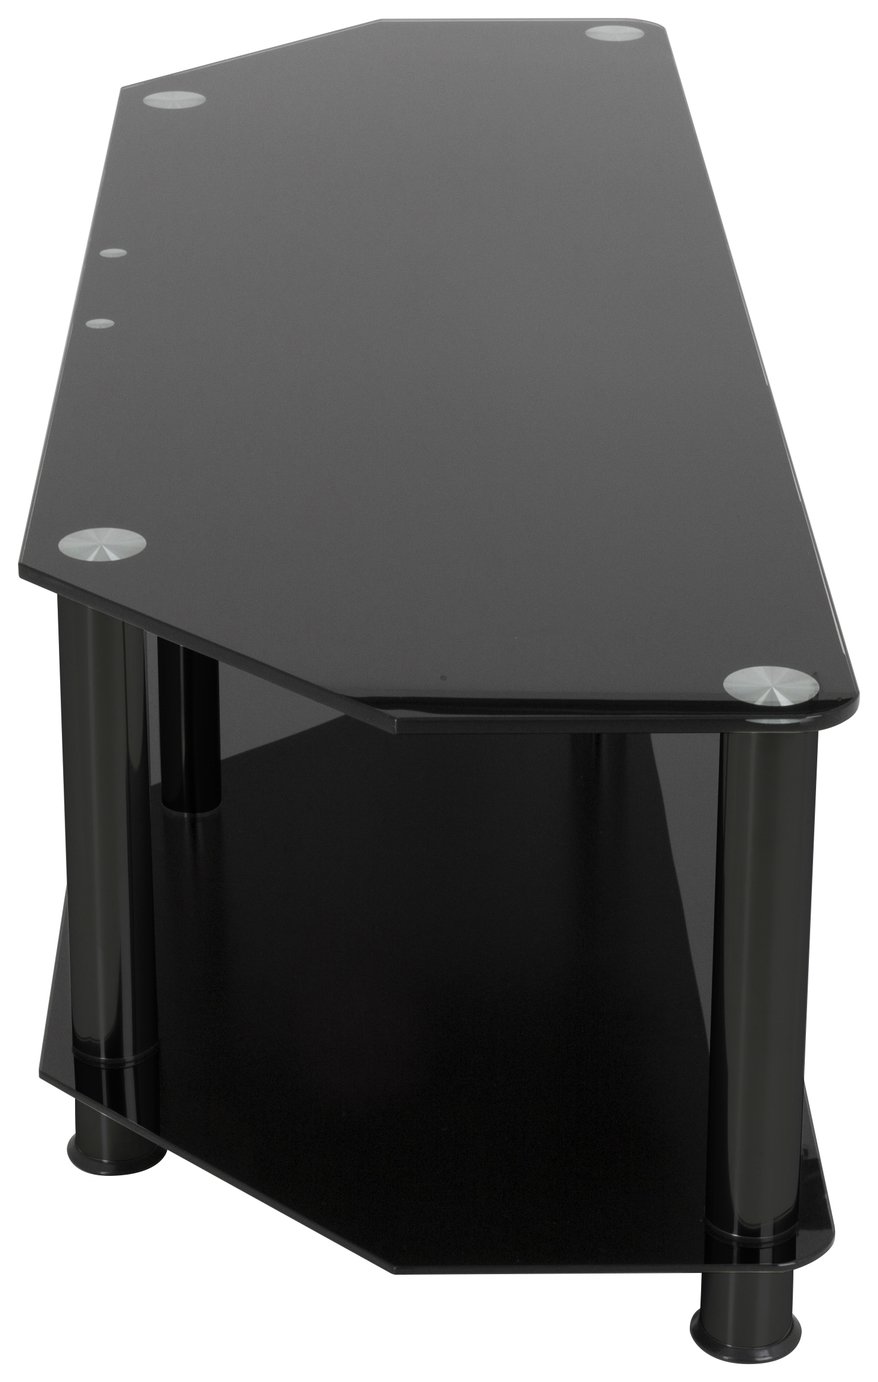 AVF Classic Up to 65 Inch Tempered Glass TV Stand Review